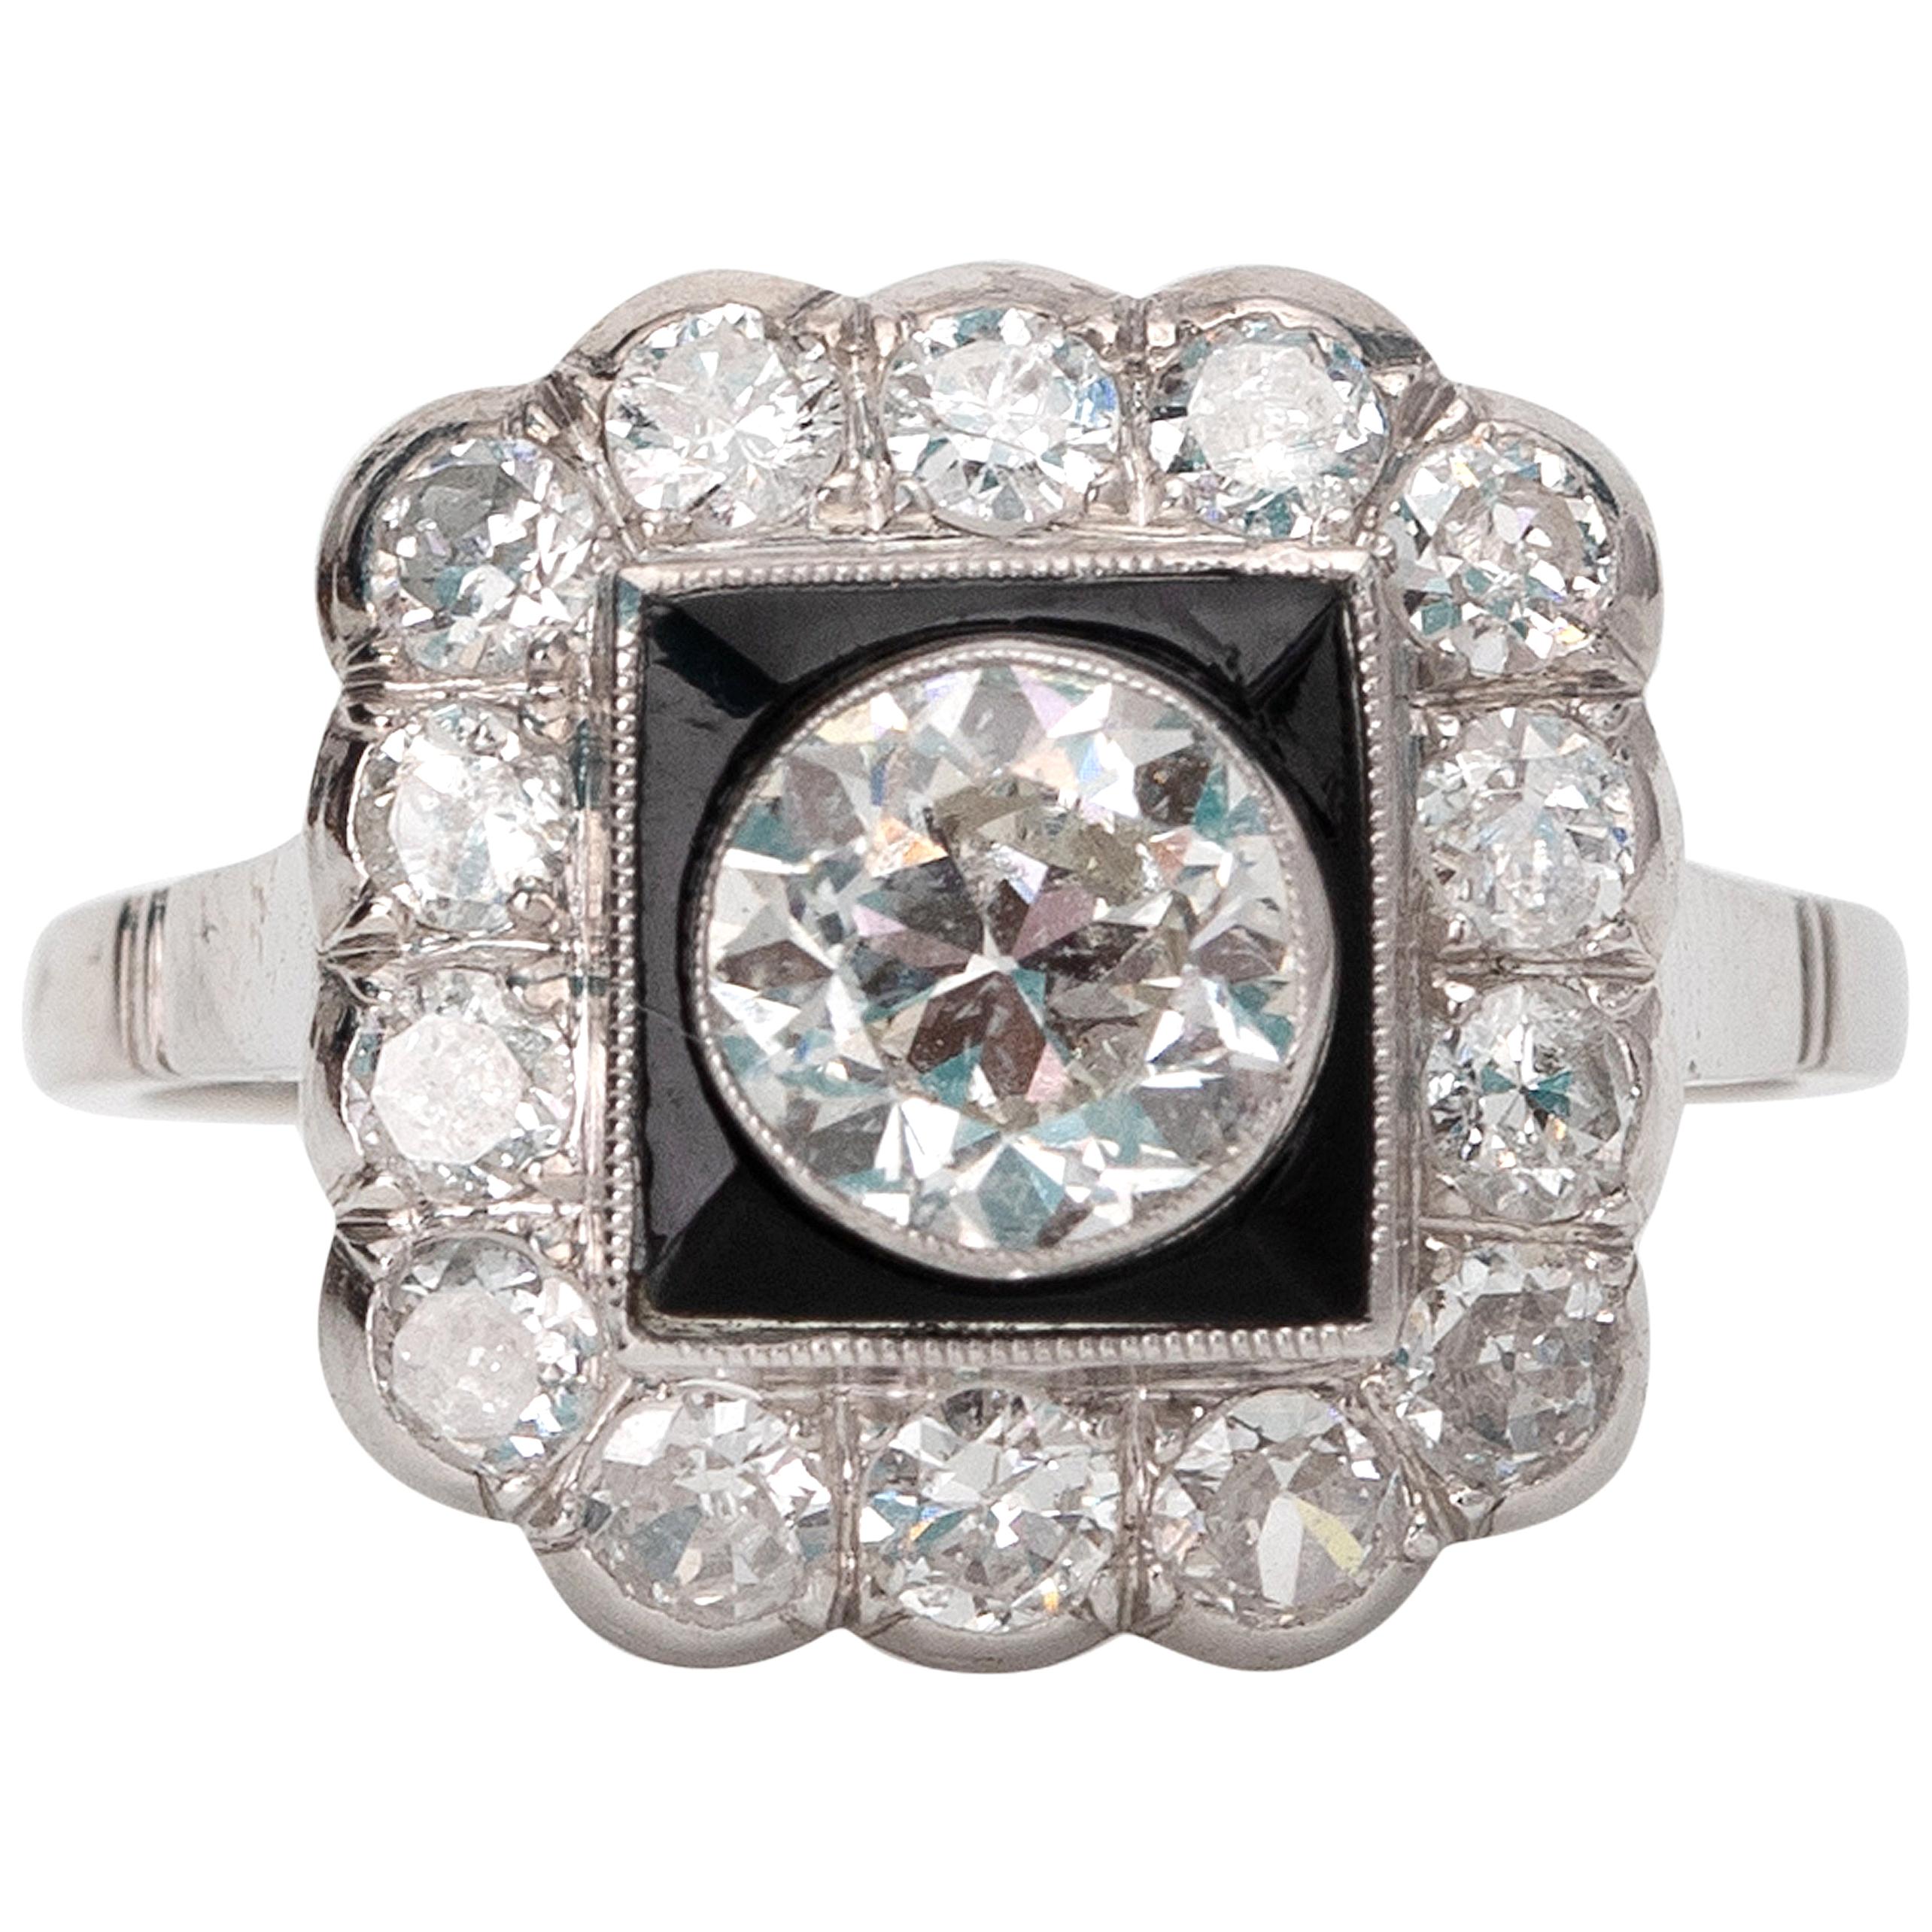 1.93 Carat Old Cut Diamond Ring with Black Onyx White Gold Square Halo Ring